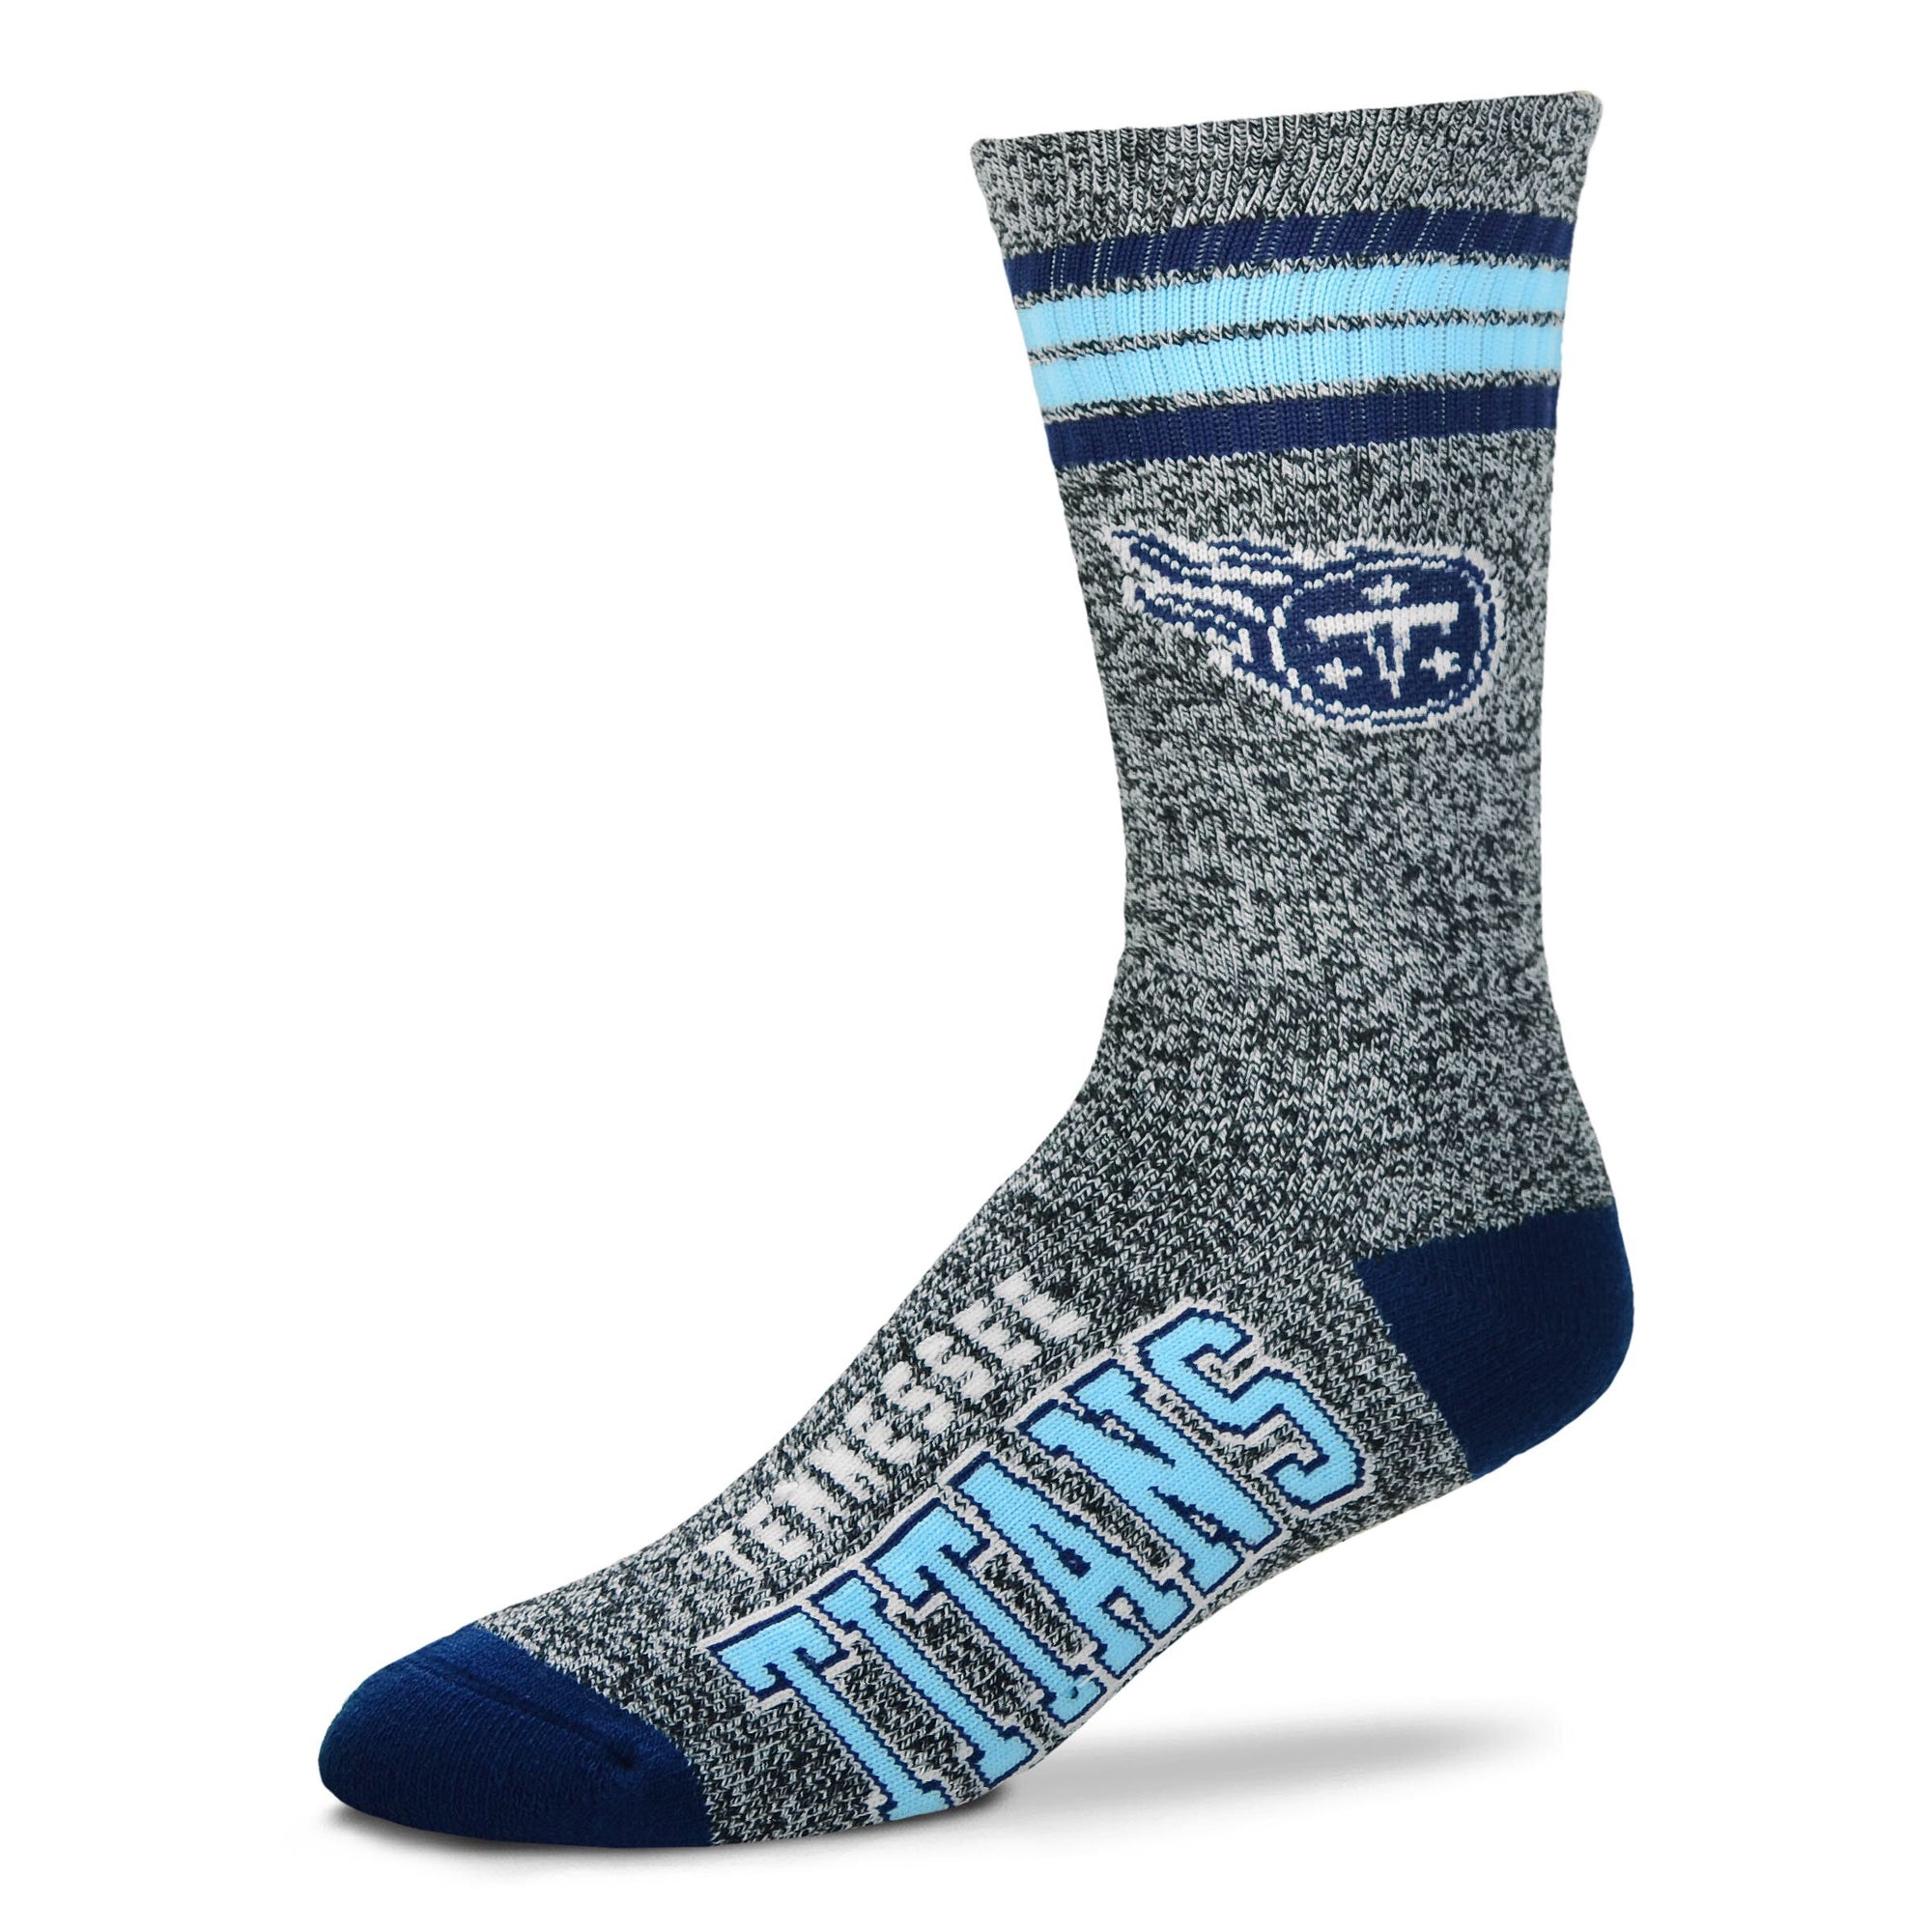 TENNESSEE TITANS - GOT MARBLED?